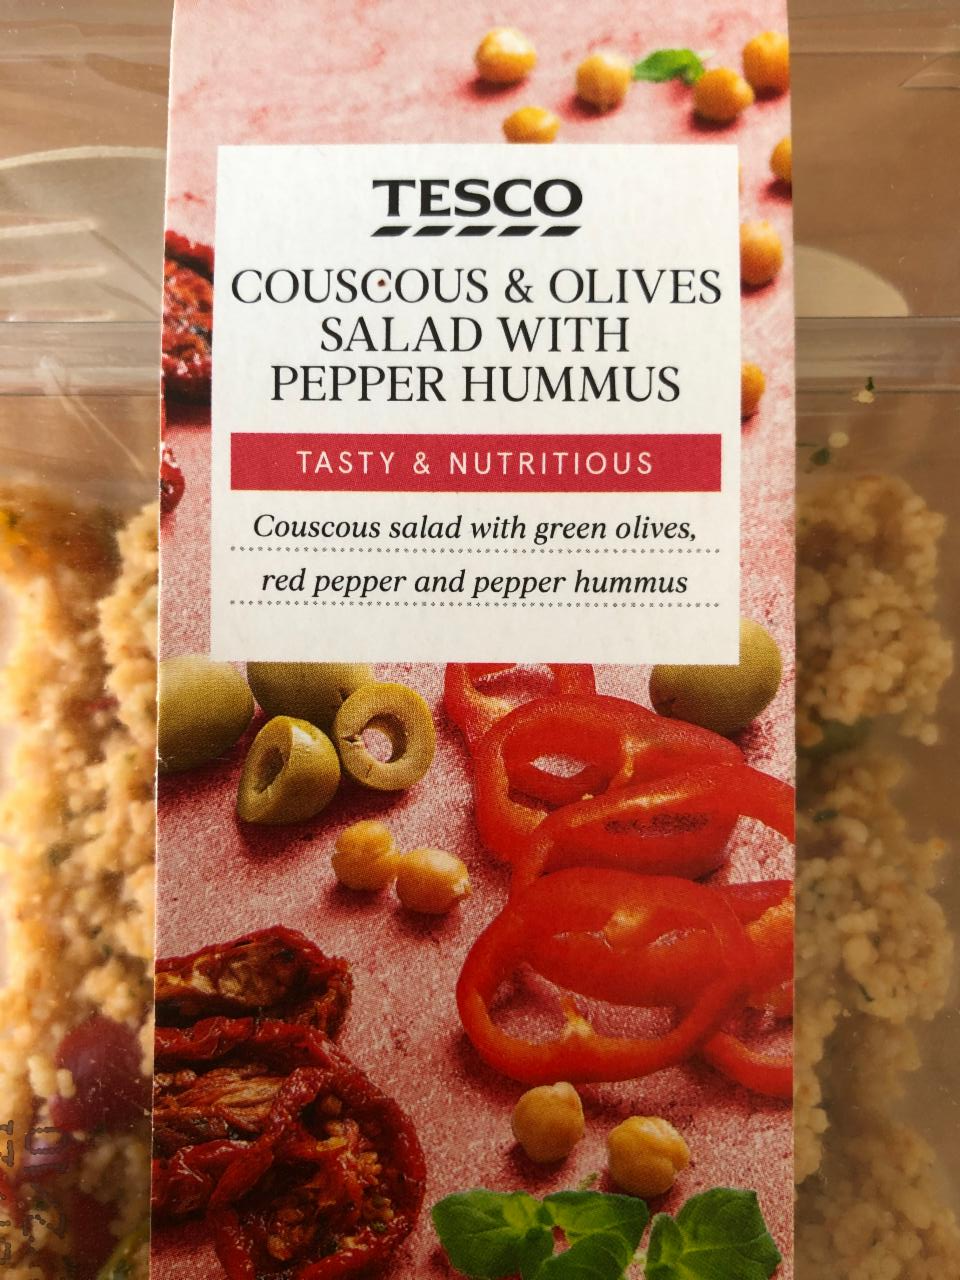 Fotografie - Couscous & Olives salad with pepper hummus Tesco